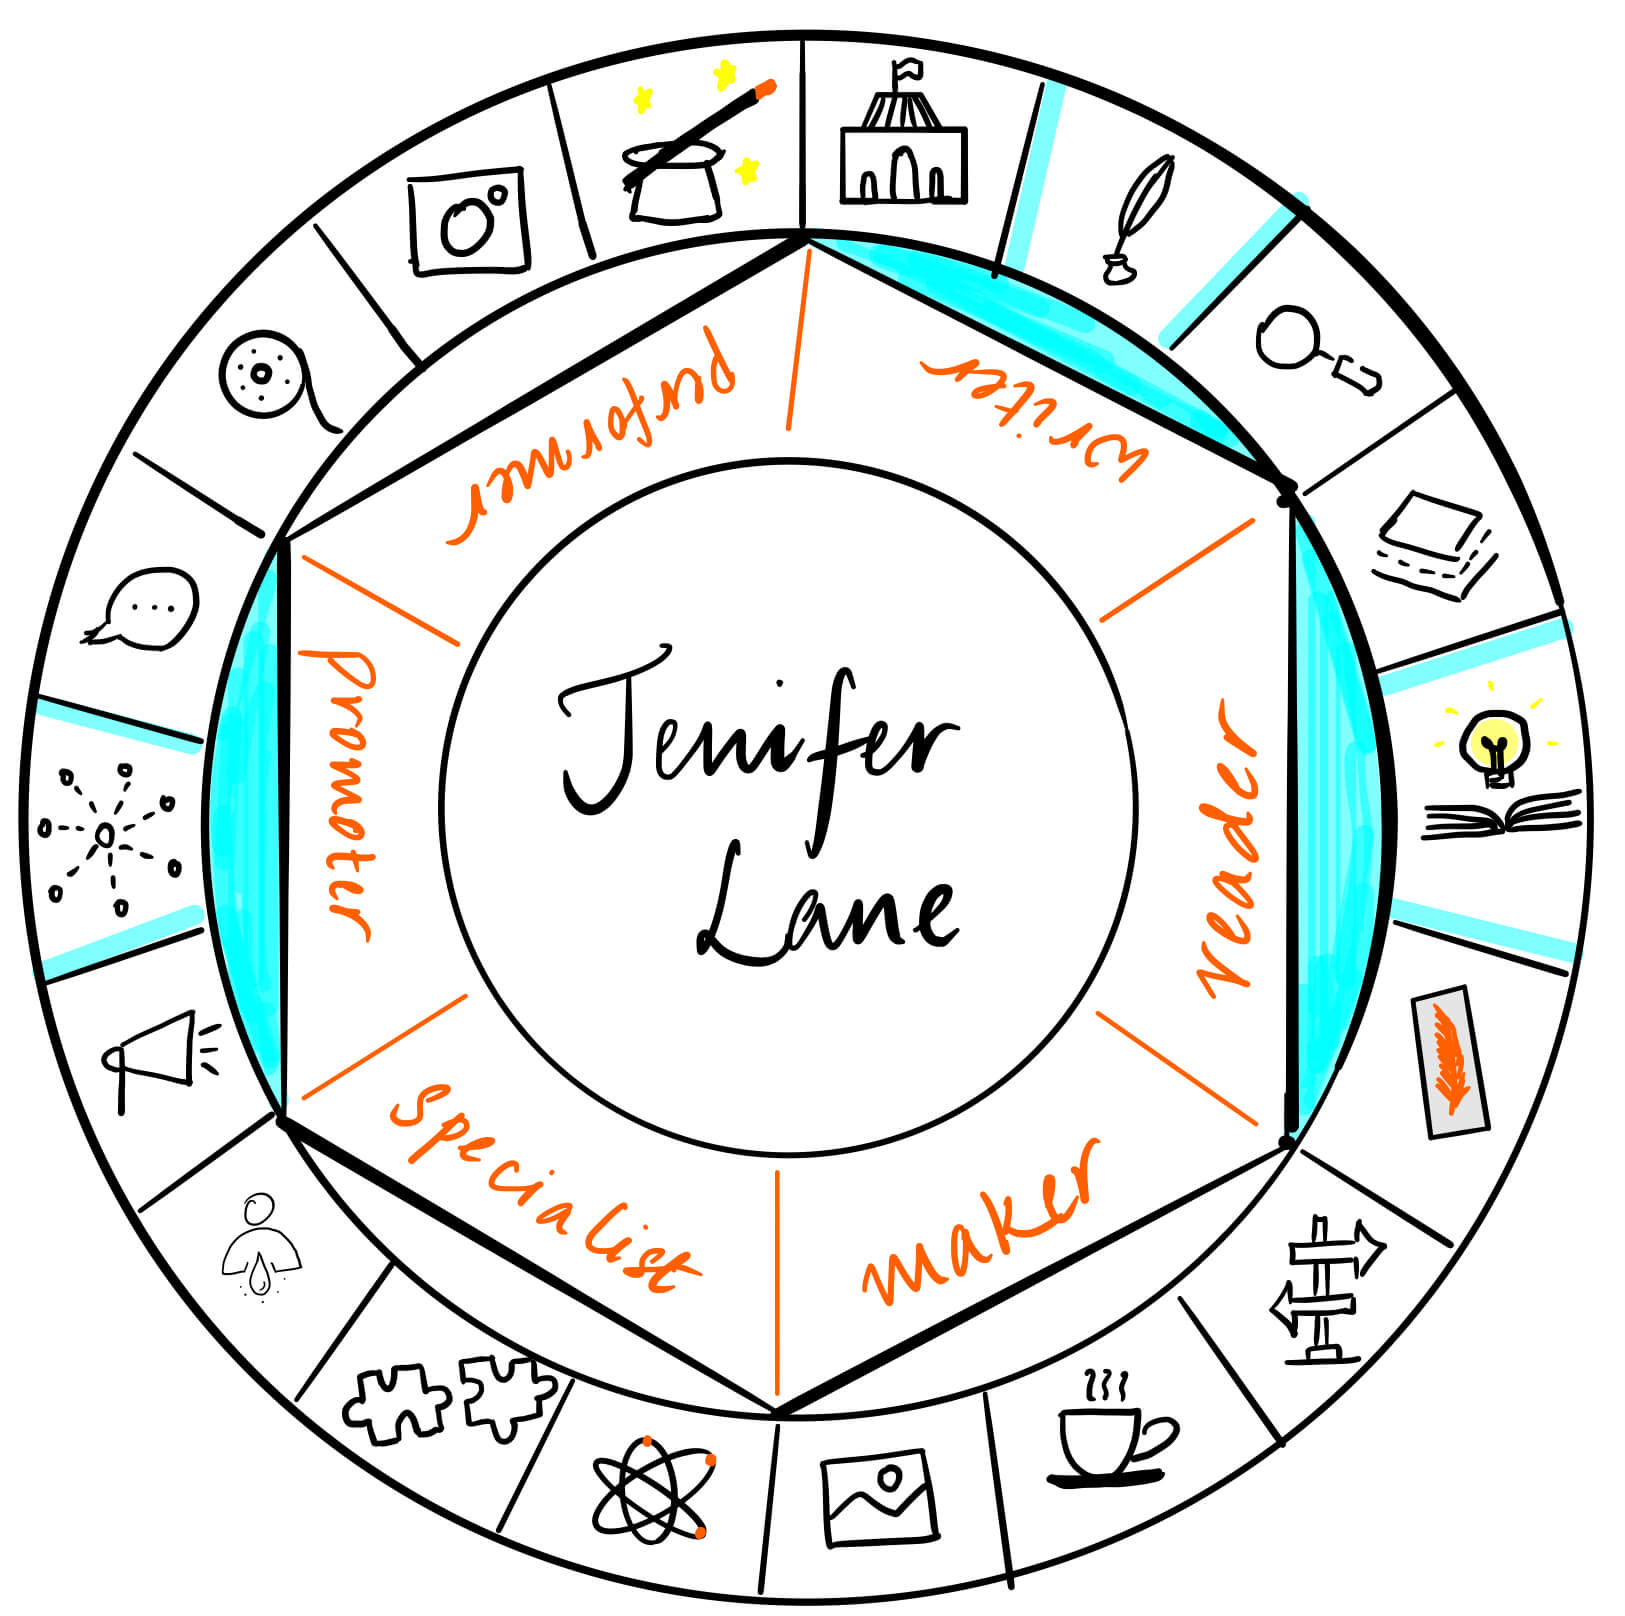 Jennifer Lane is a writer, reader and promoter. It's a pleasure to have her over for a guest post on The Creator's Roulette to talk about short stories.